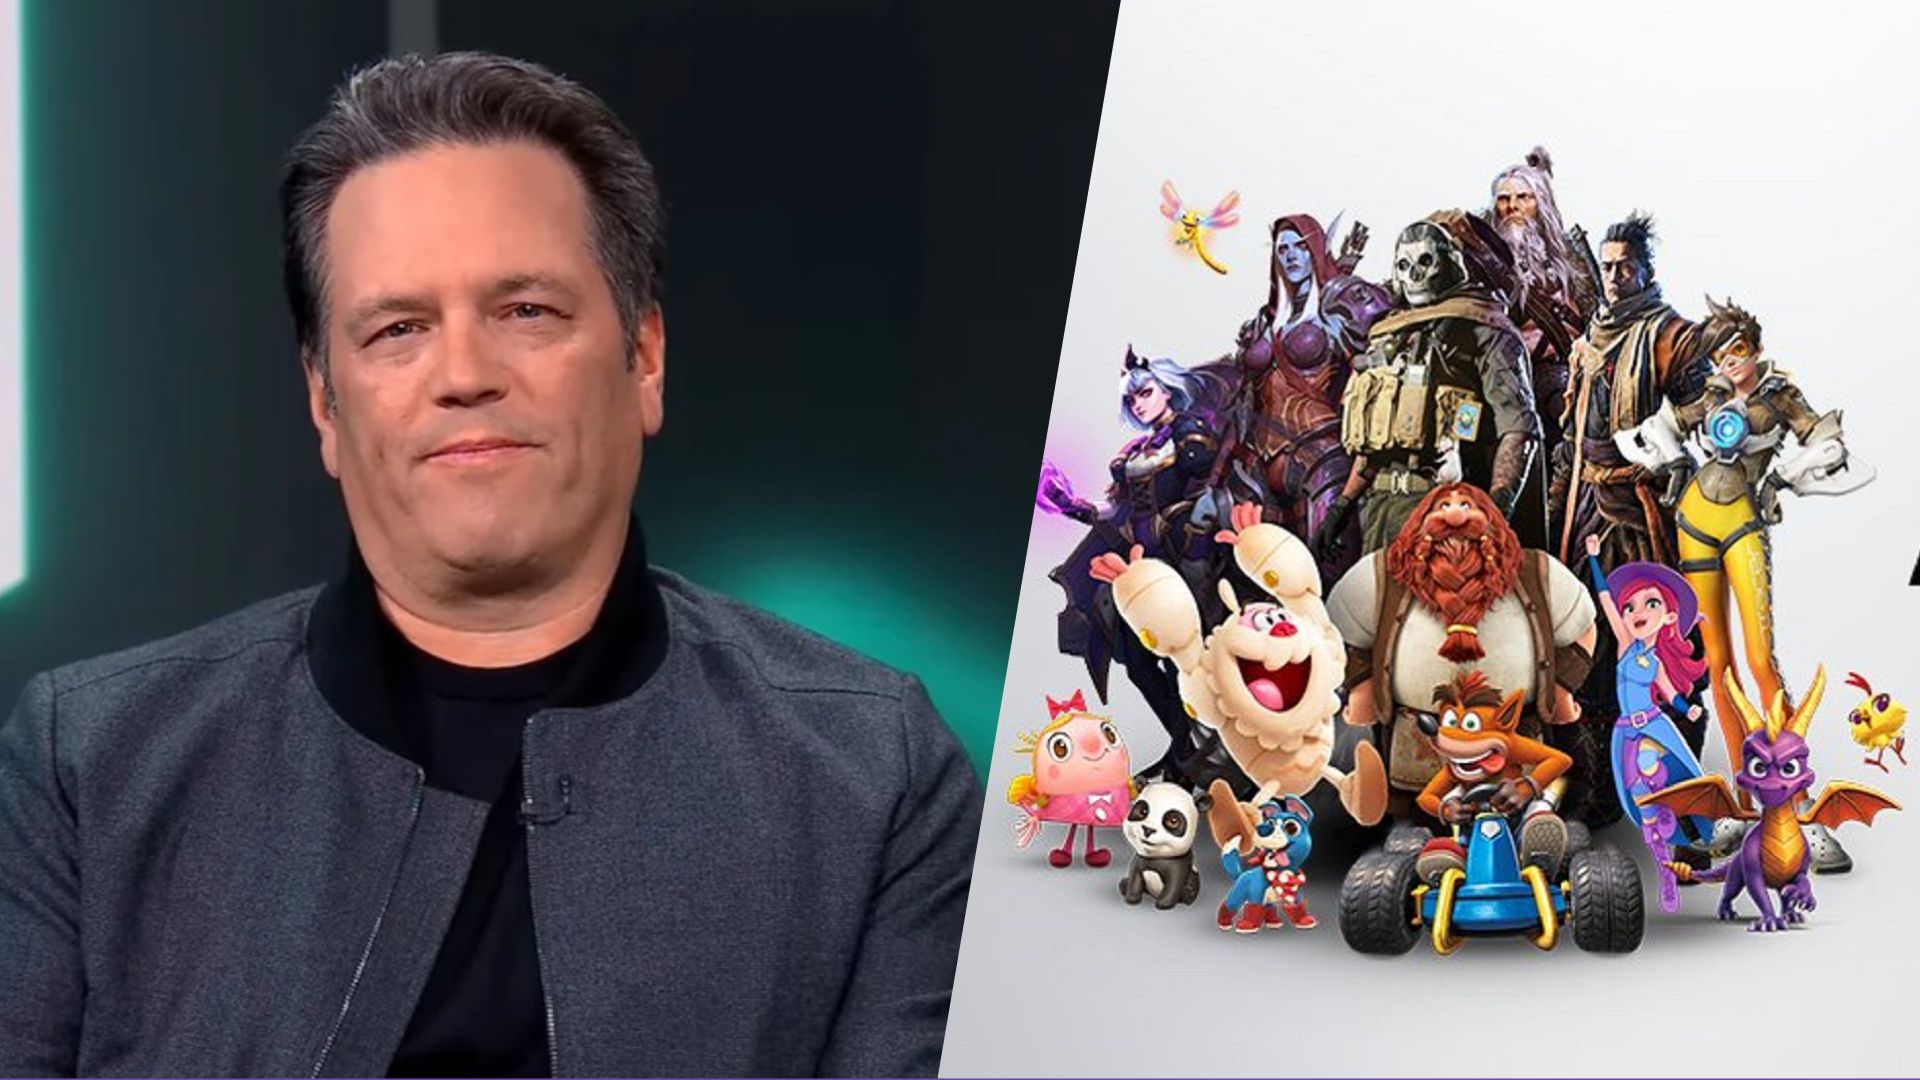 Phil Spencer Blames Activision Layoffs On Lack Of Growth In The Game Industry